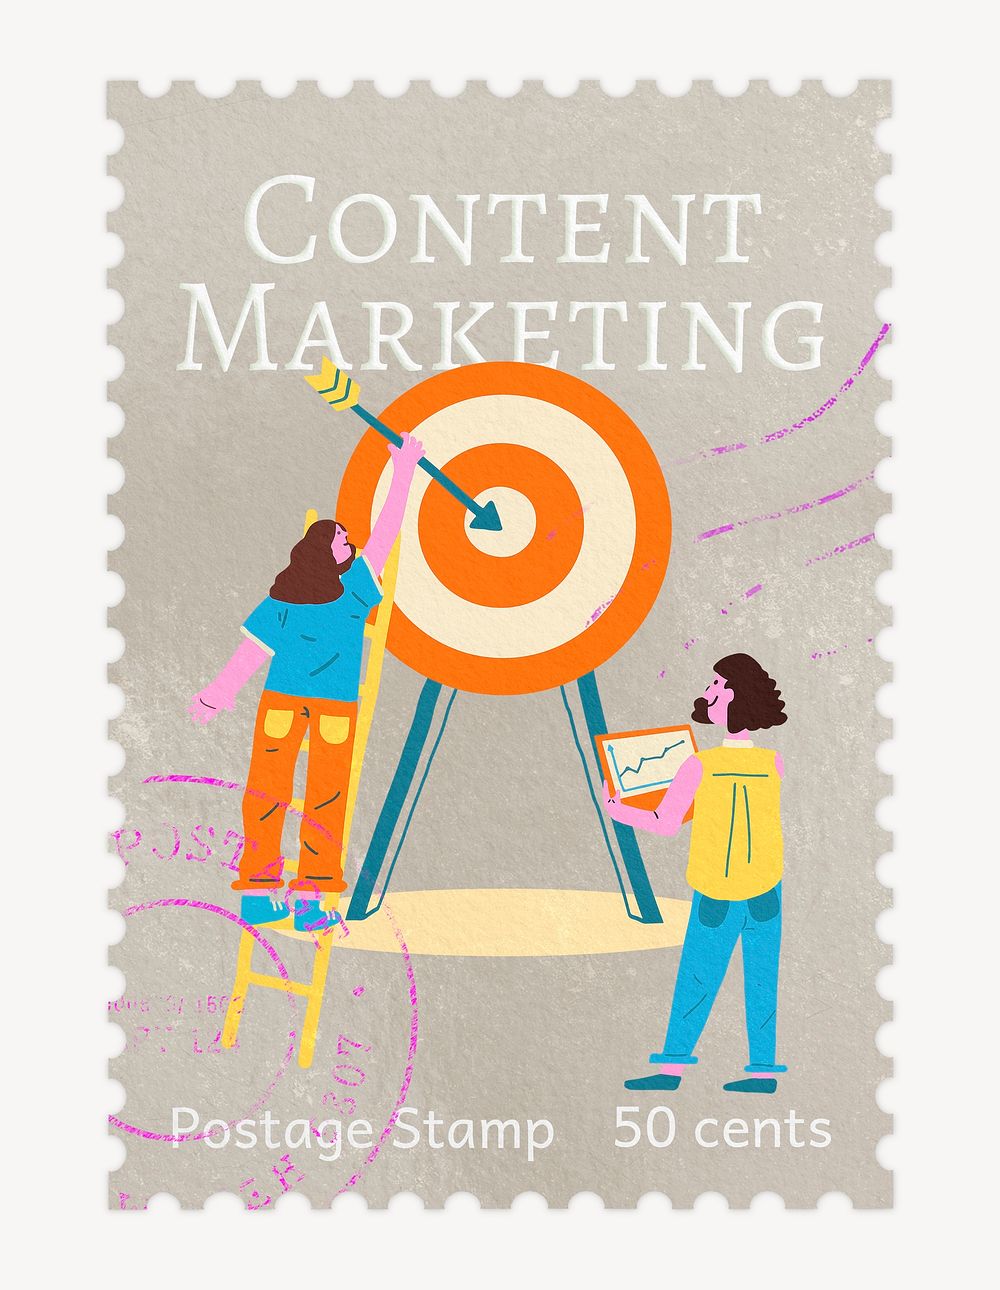 Content marketing postage stamp, business stationery collage element